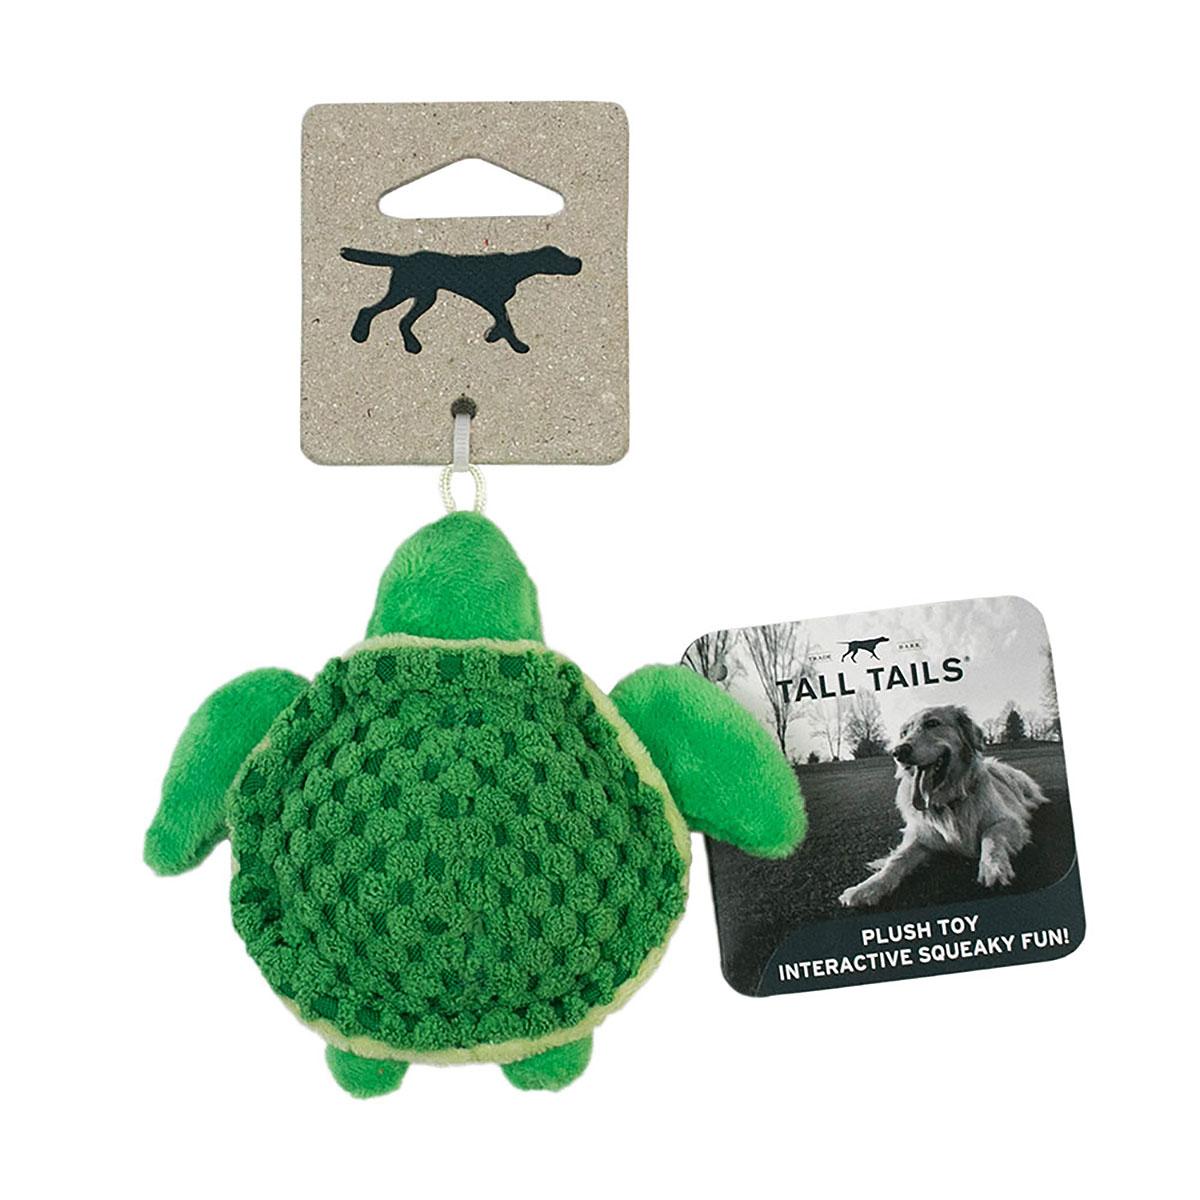 https://images.baxterboo.com/global/images/products/large/tall-tails-plush-baby-turtle-dog-toy-with-squeaker-4-7617.jpg